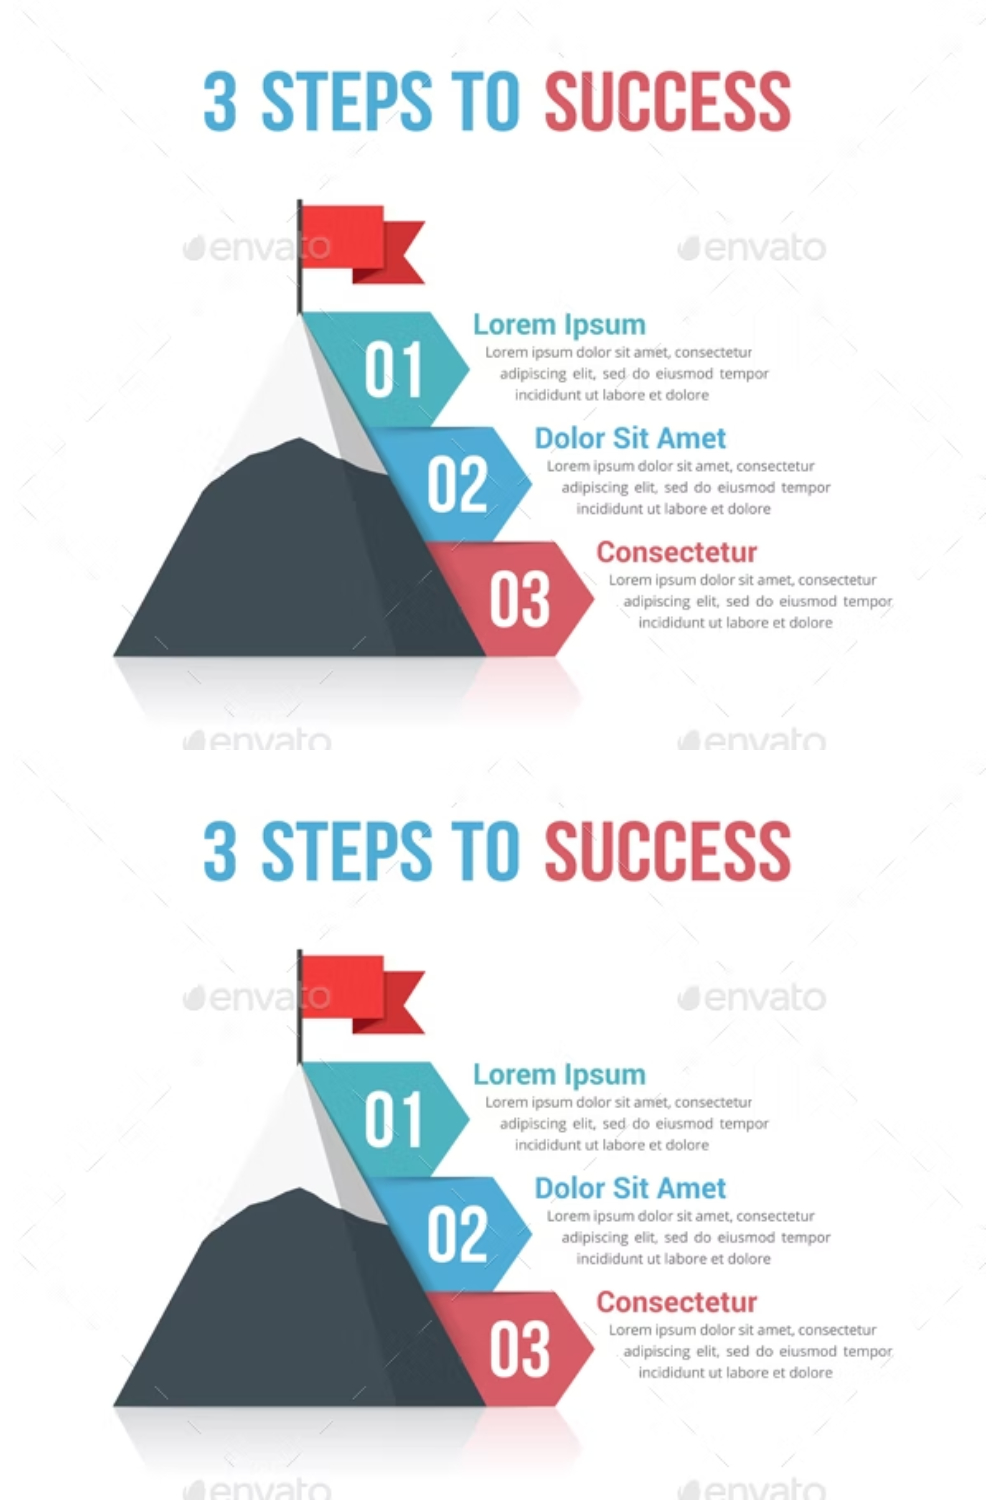 3 Steps To Success Pinterest Cover.